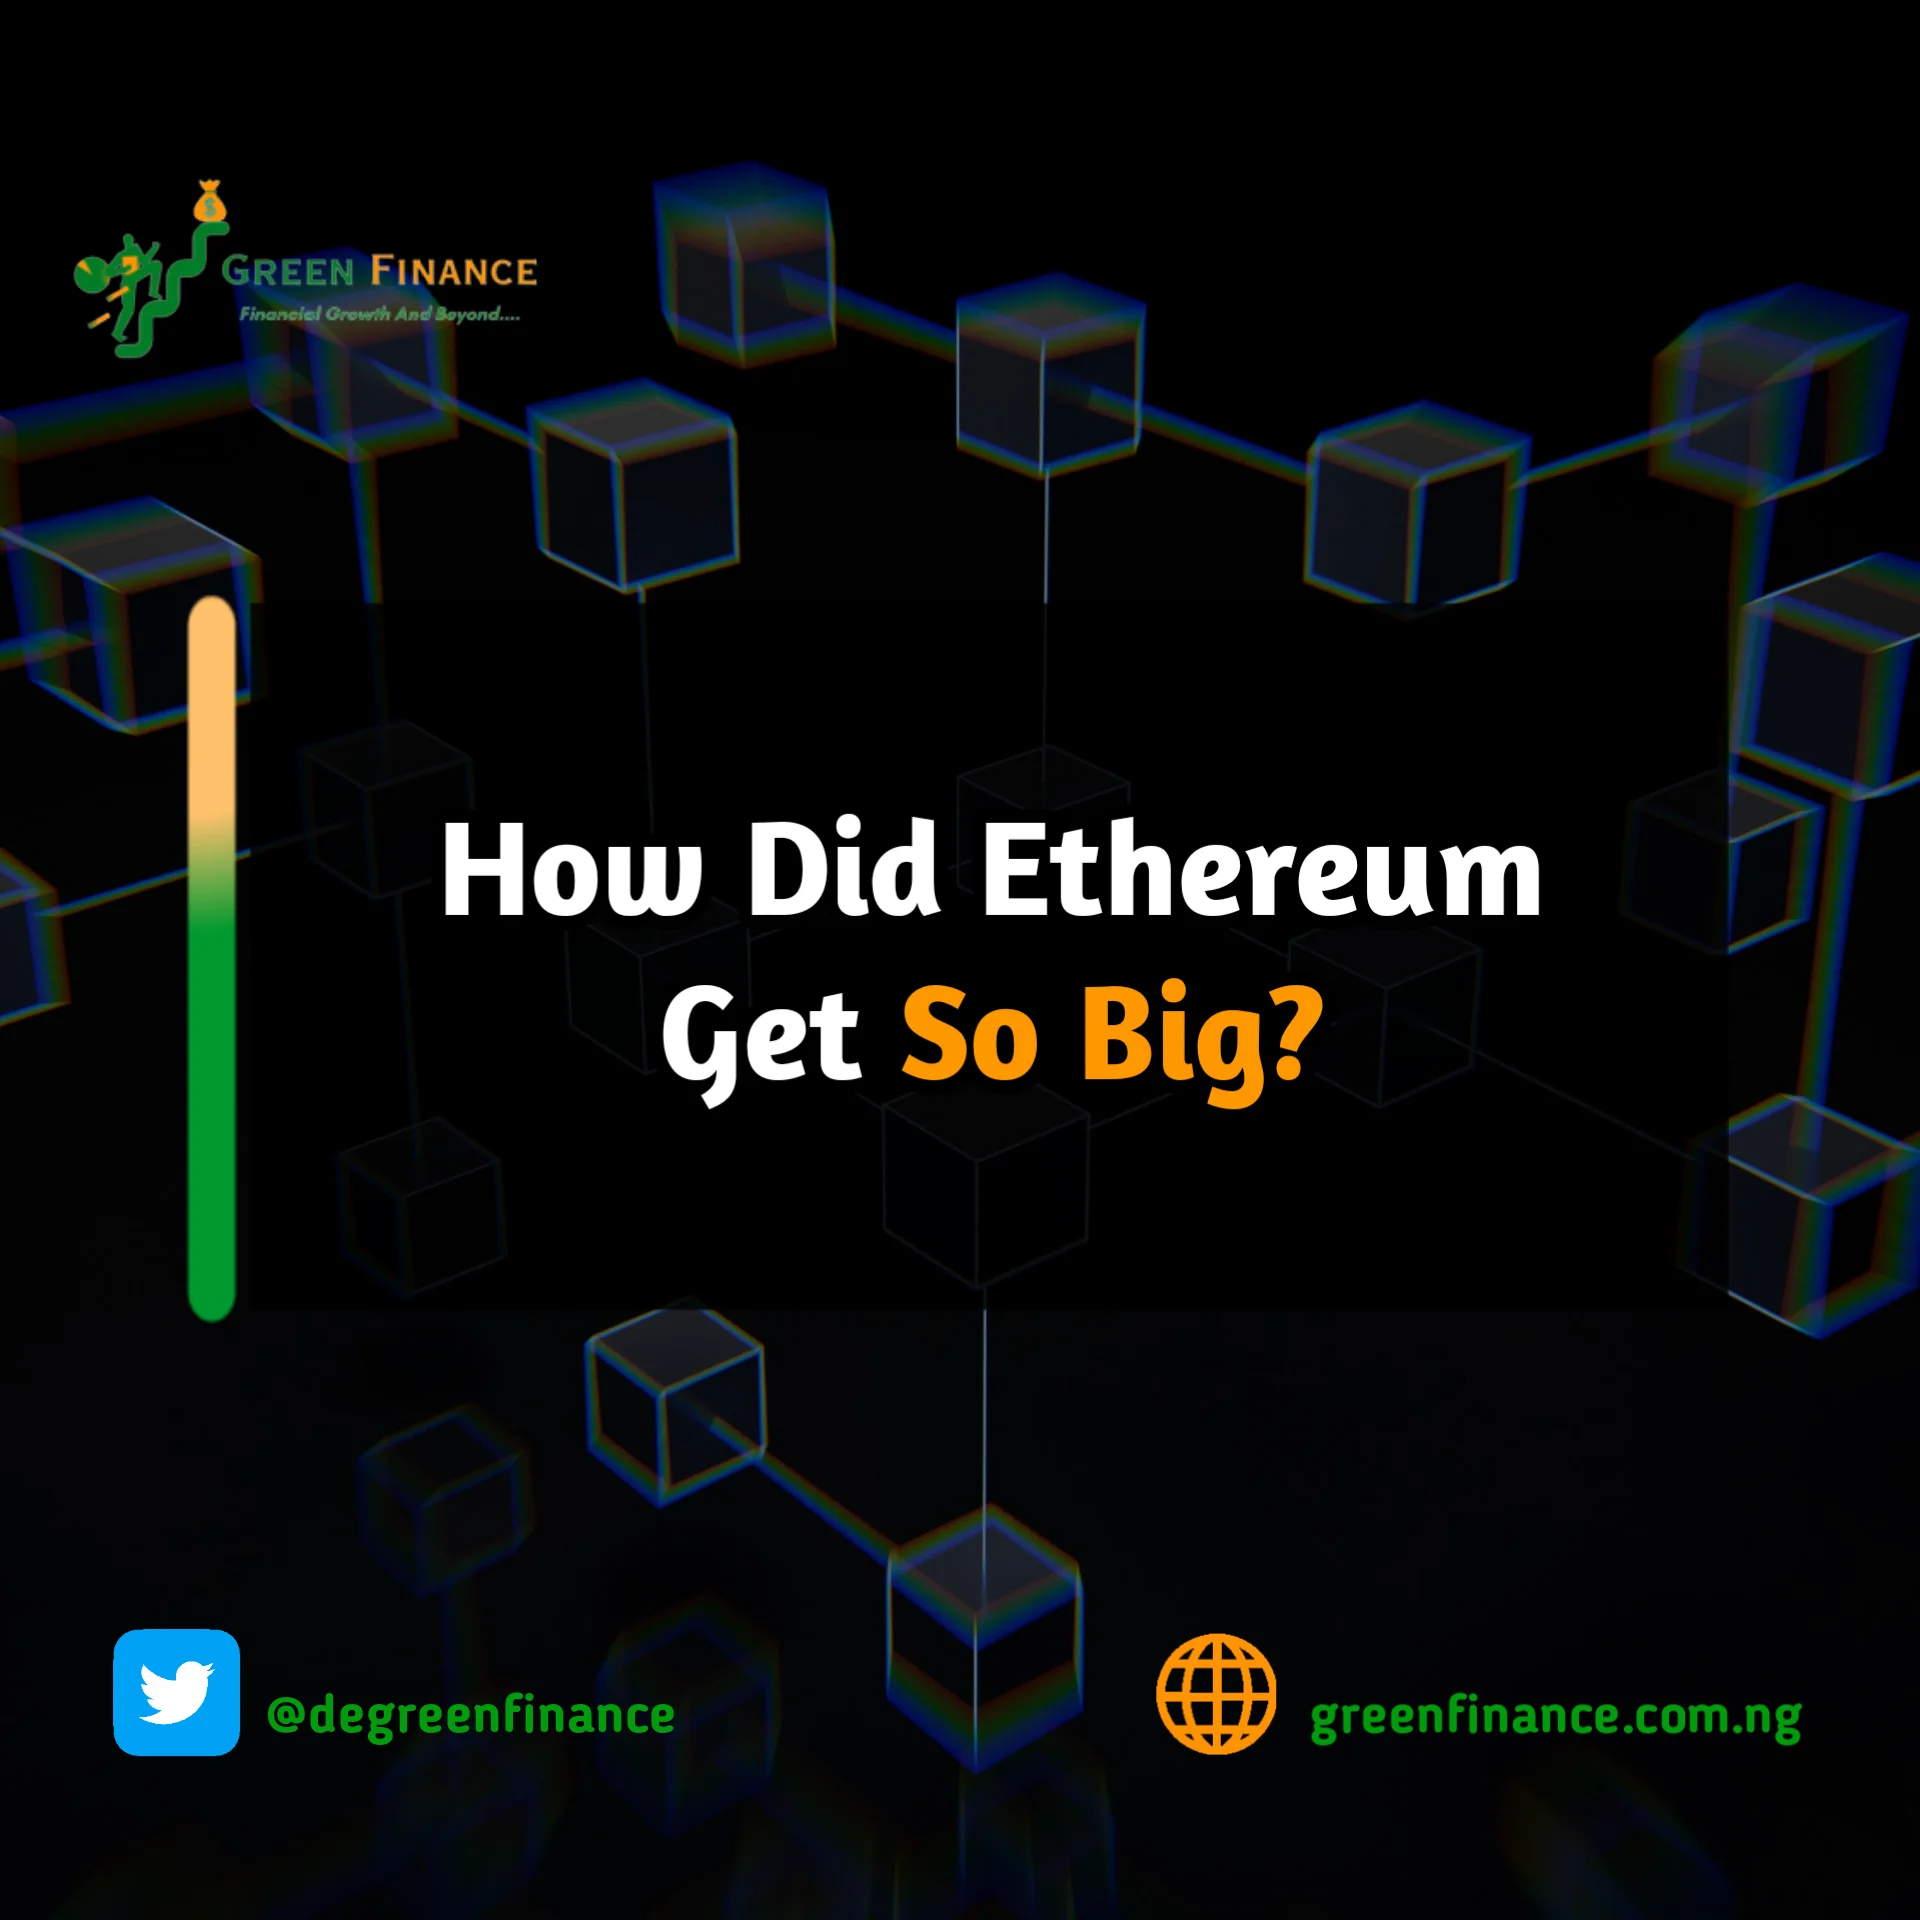 How did Ethereum get so big?